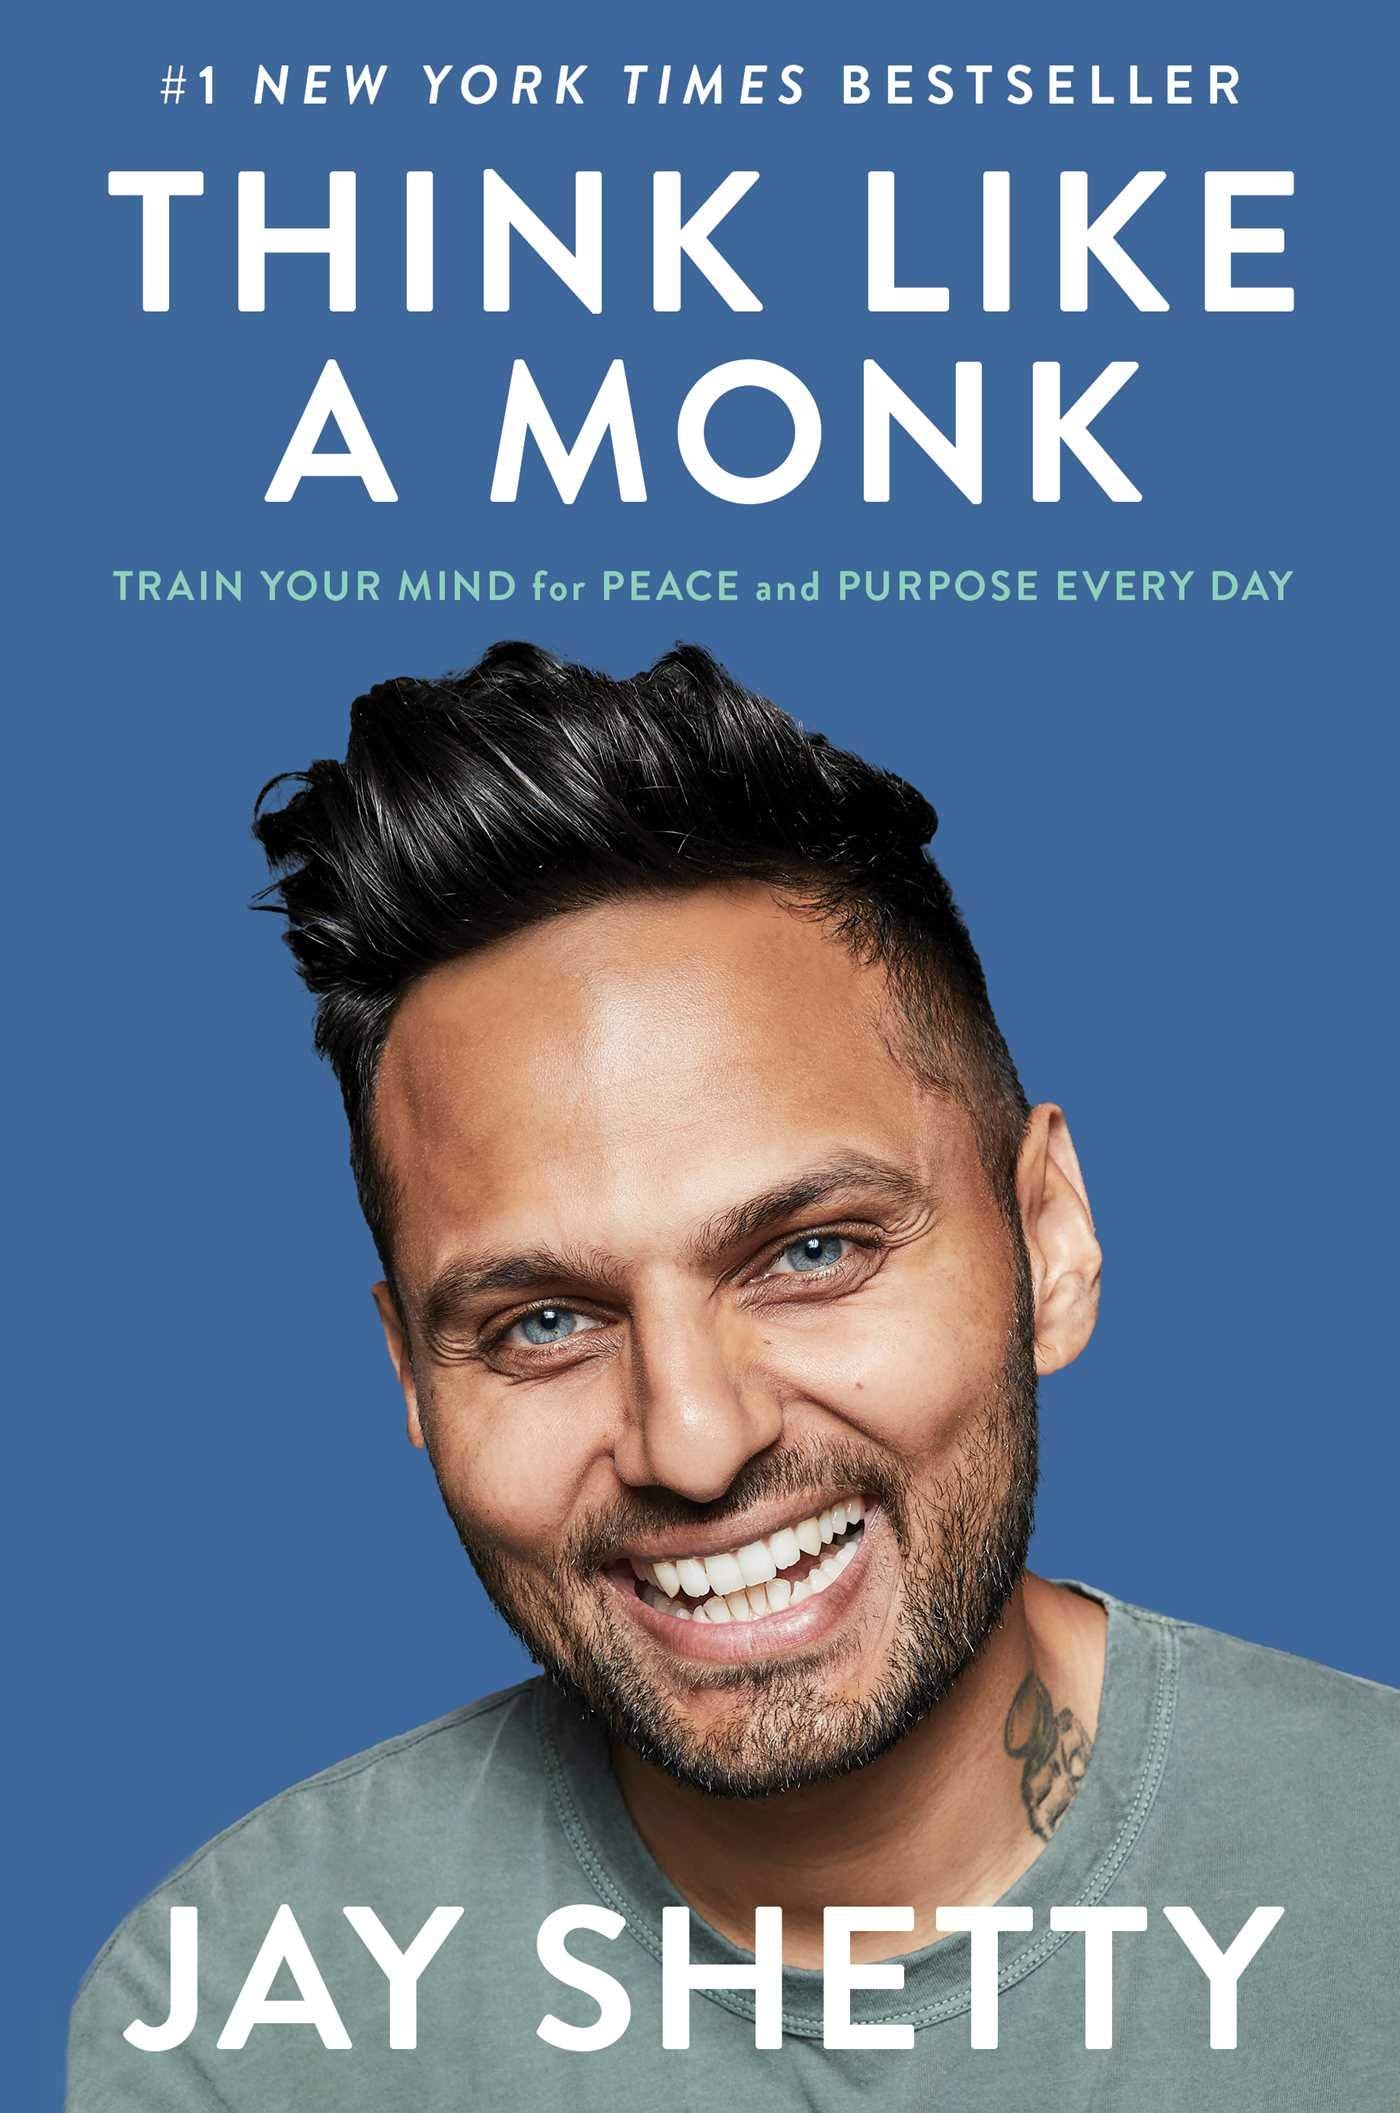 Think Like a Monk: Train Your Mind for Peace and Purpose Every Day Hardcover by Jay Shetty